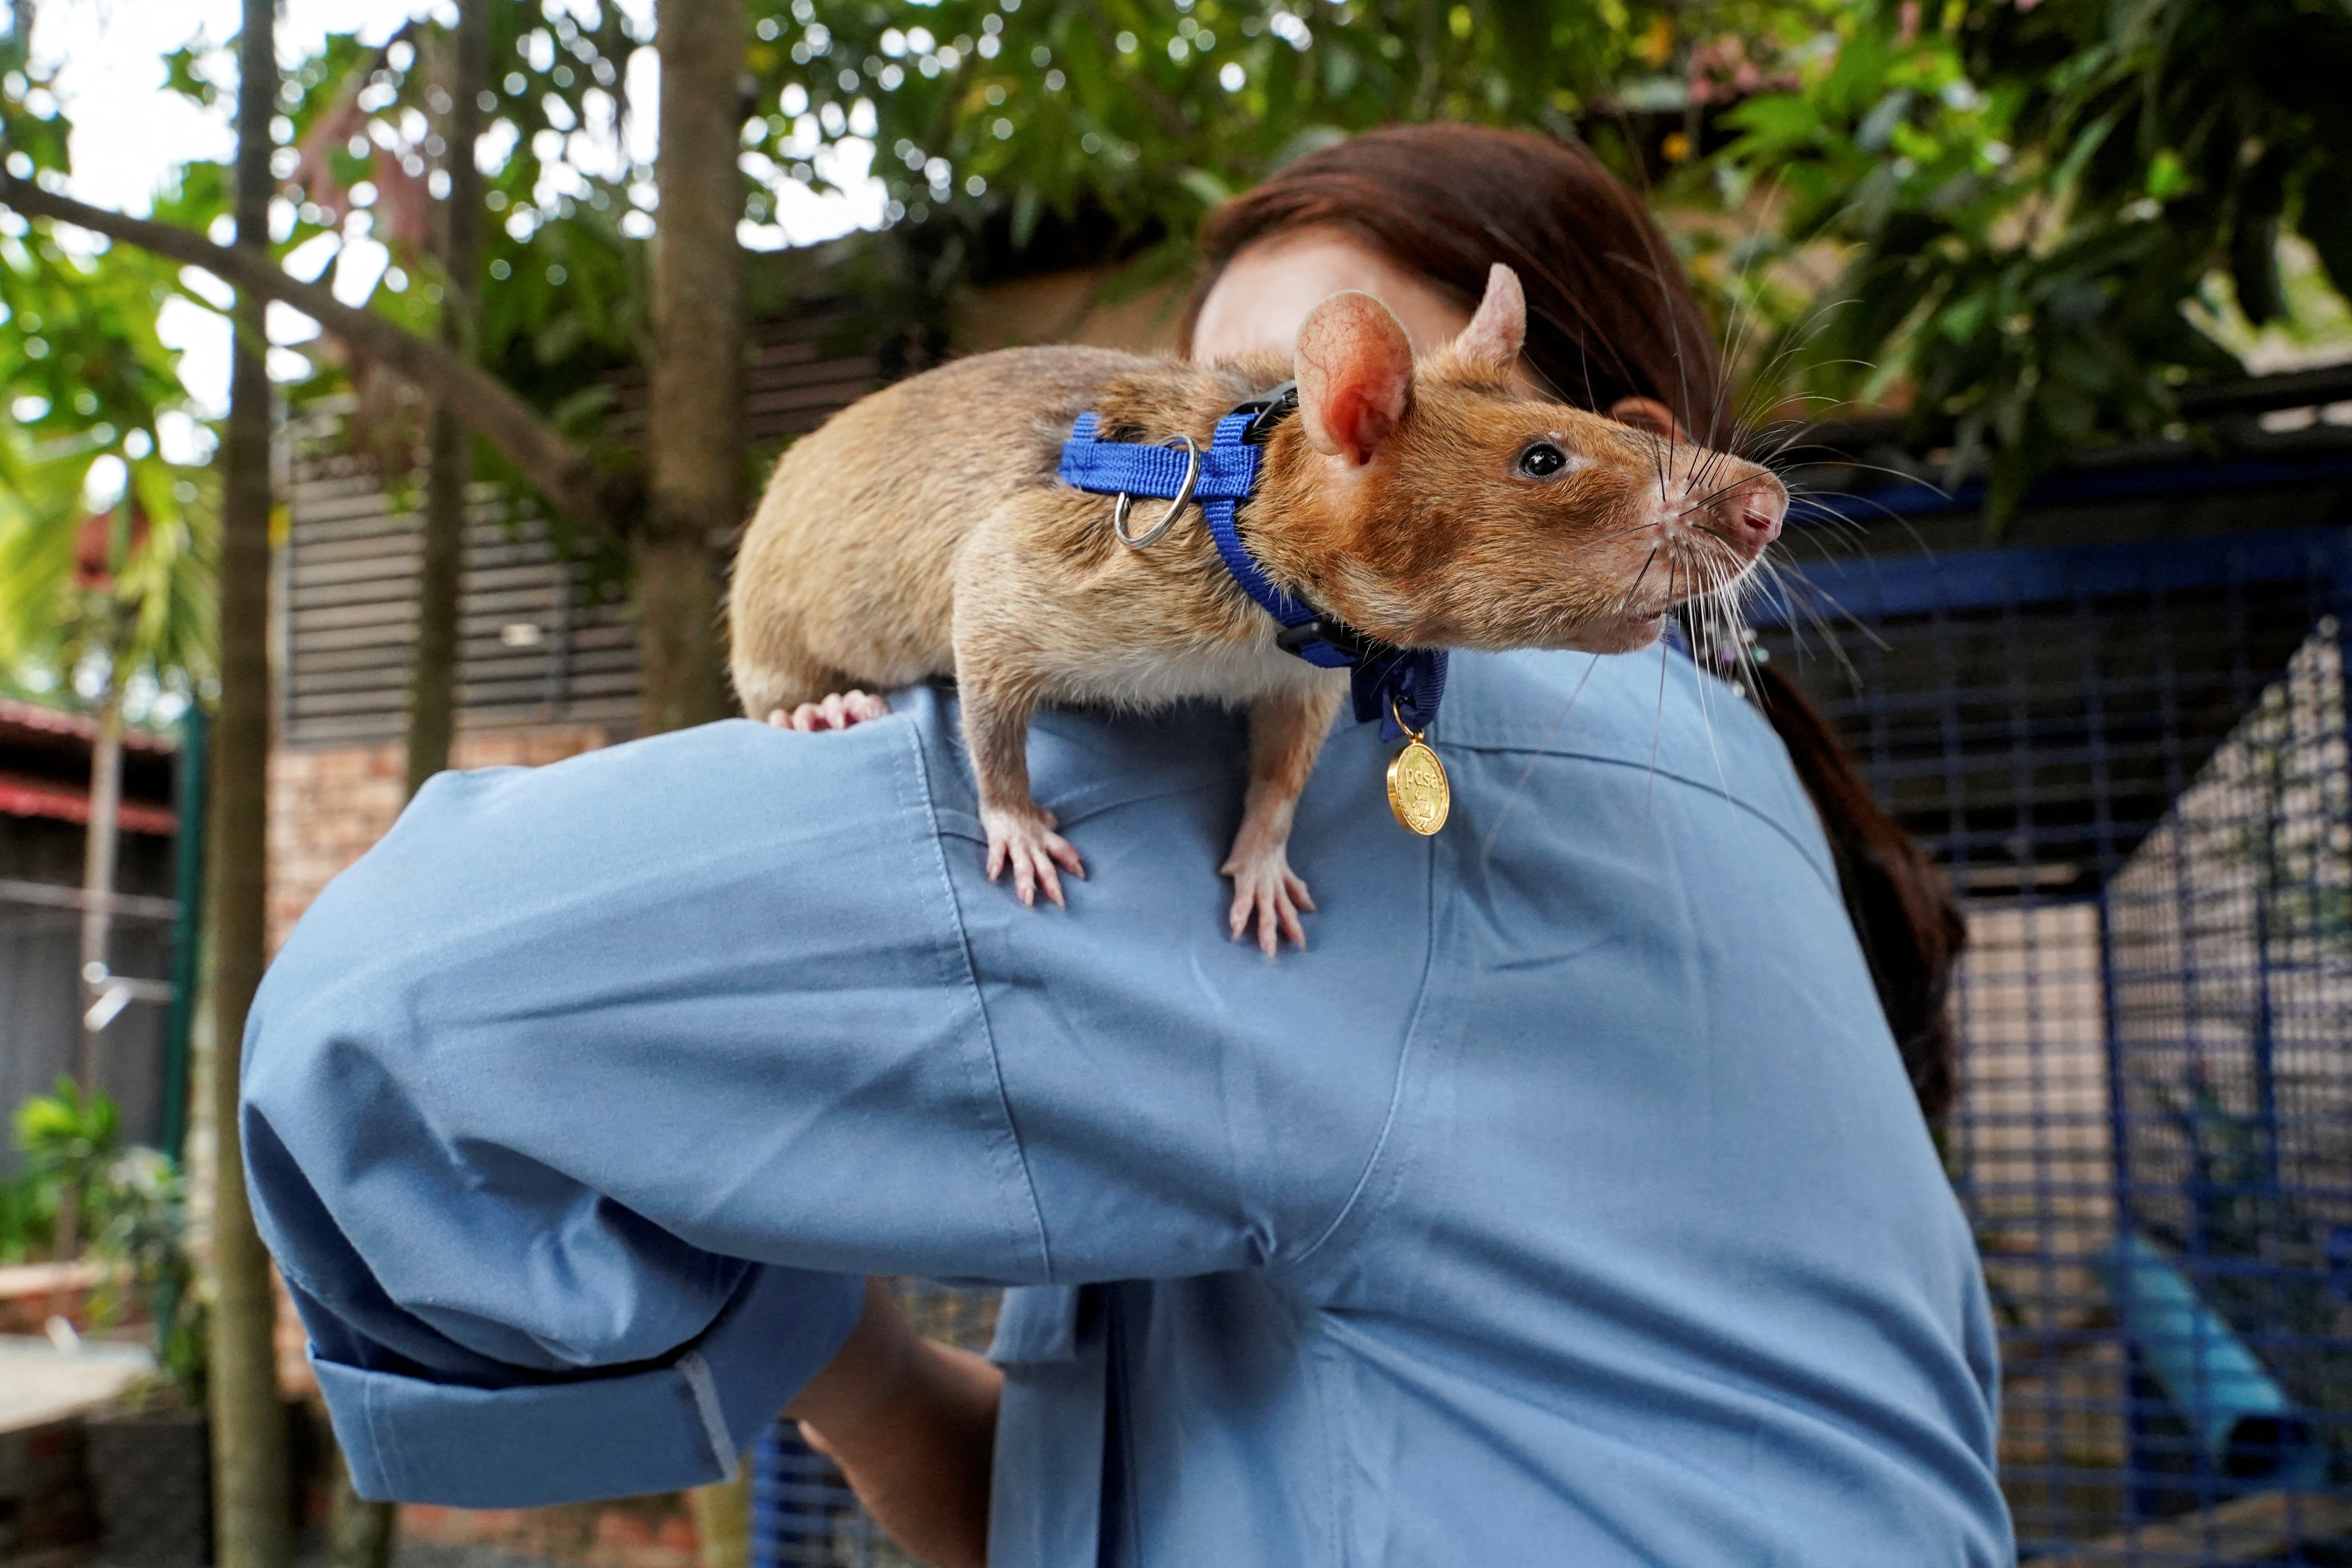 Magawa, the recently retired mine detection rat, sits on the shoulder of its former handler So Malen at the APOPO Visitor Center in Siem Reap, Cambodia, June 10, 2021. REUTERS/Cindy Liu